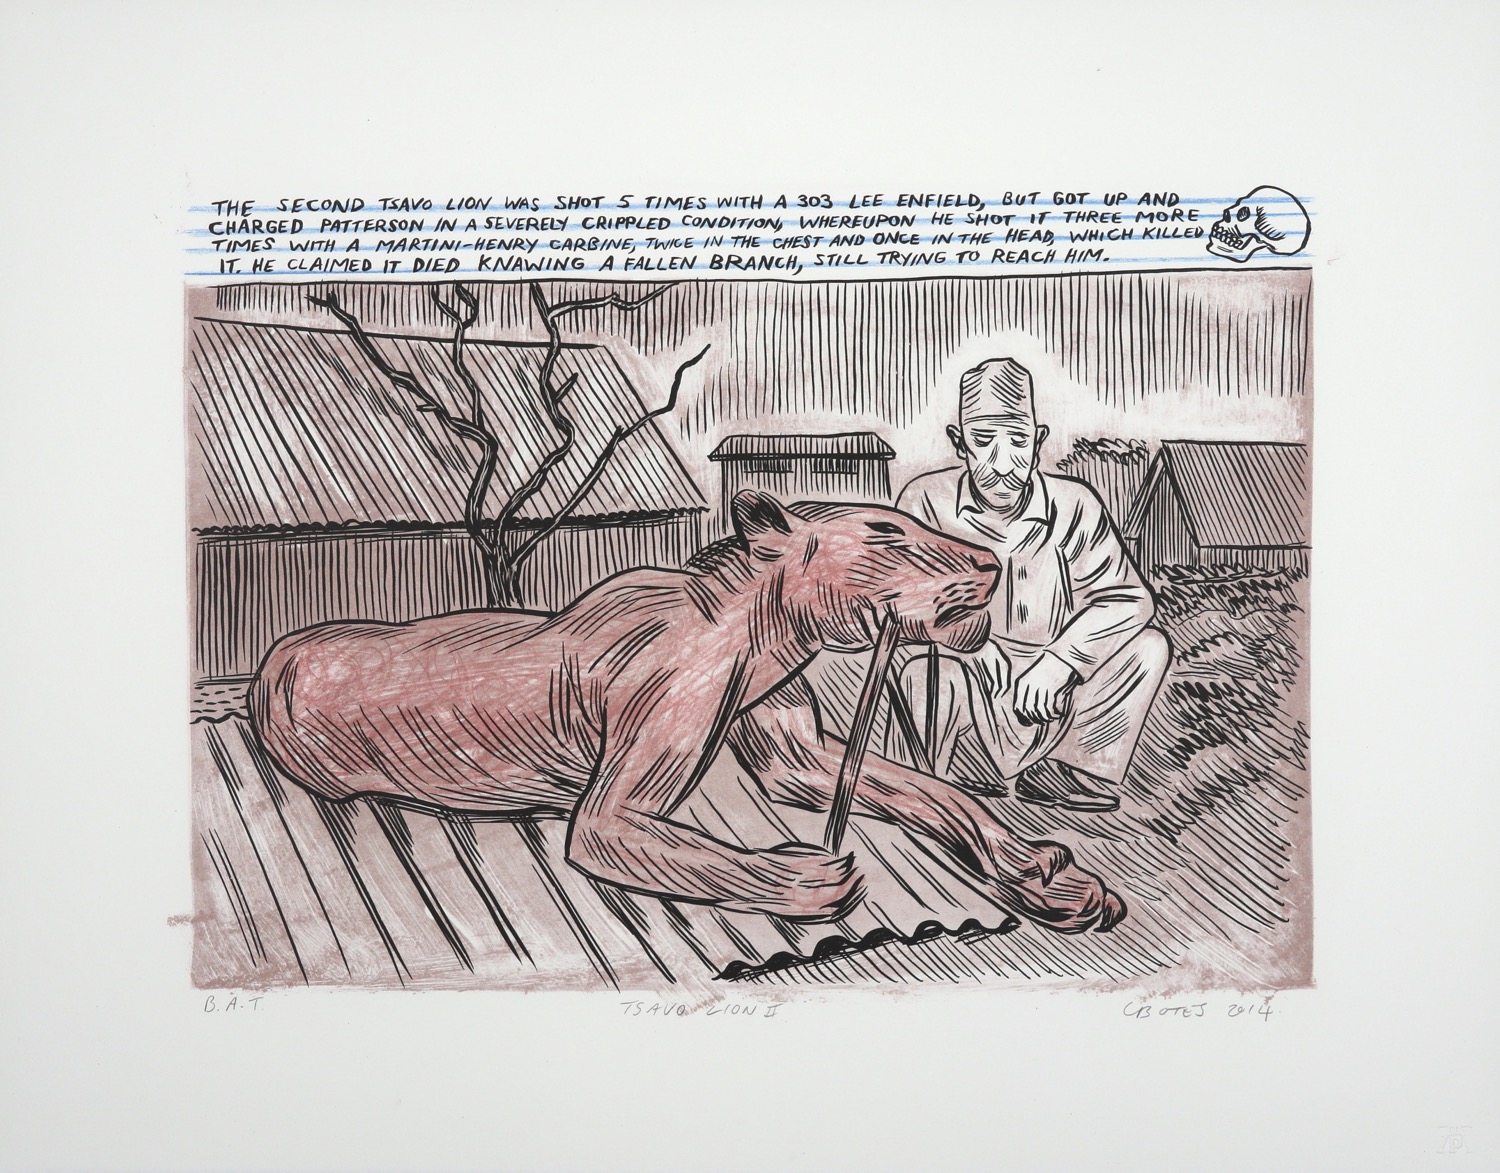 Dead lion with head propped and a man squatting on his haunches, drawn in comic style.